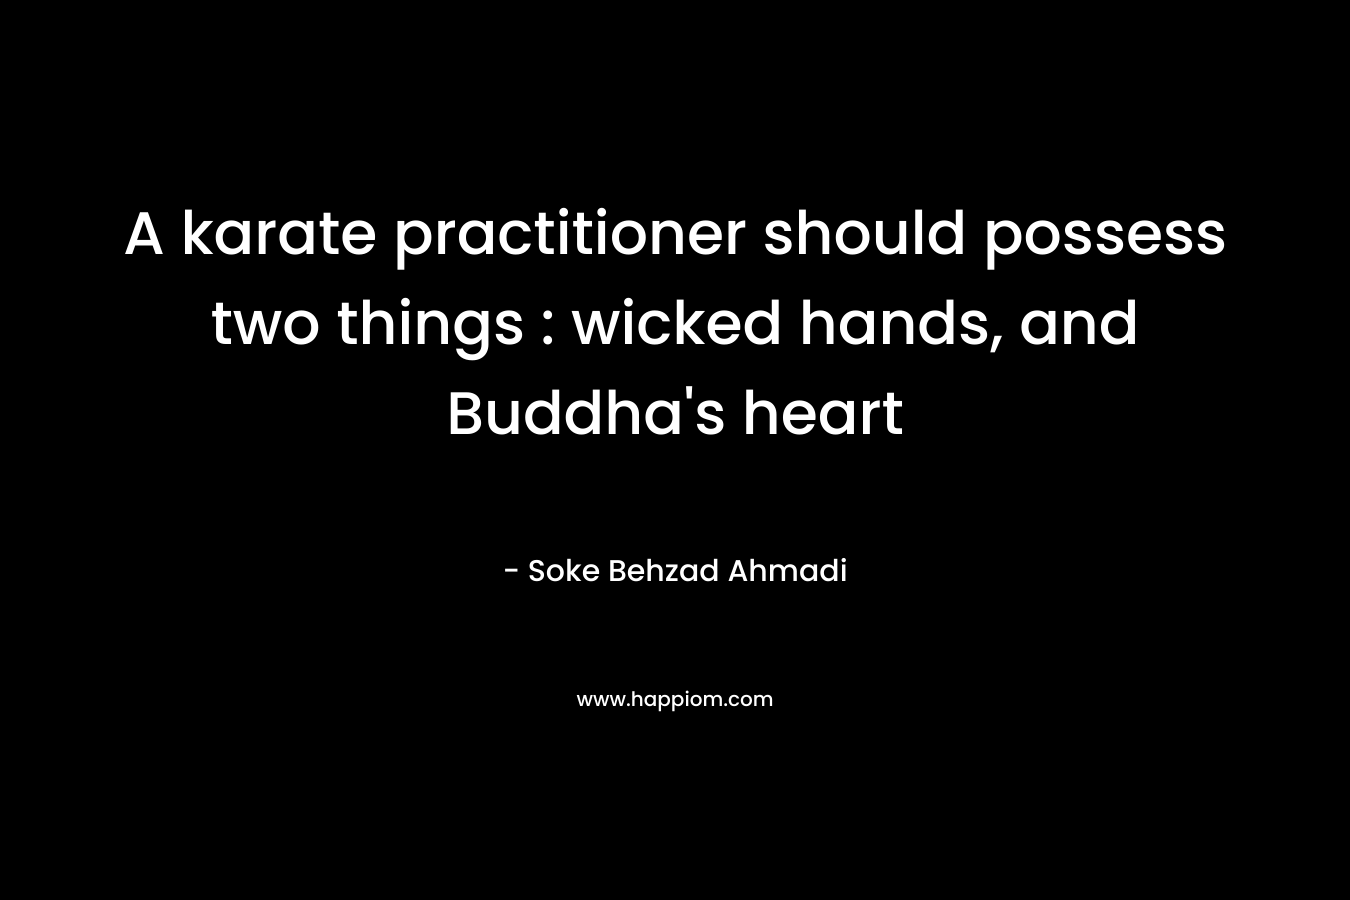 A karate practitioner should possess two things : wicked hands, and Buddha’s heart – Soke Behzad Ahmadi